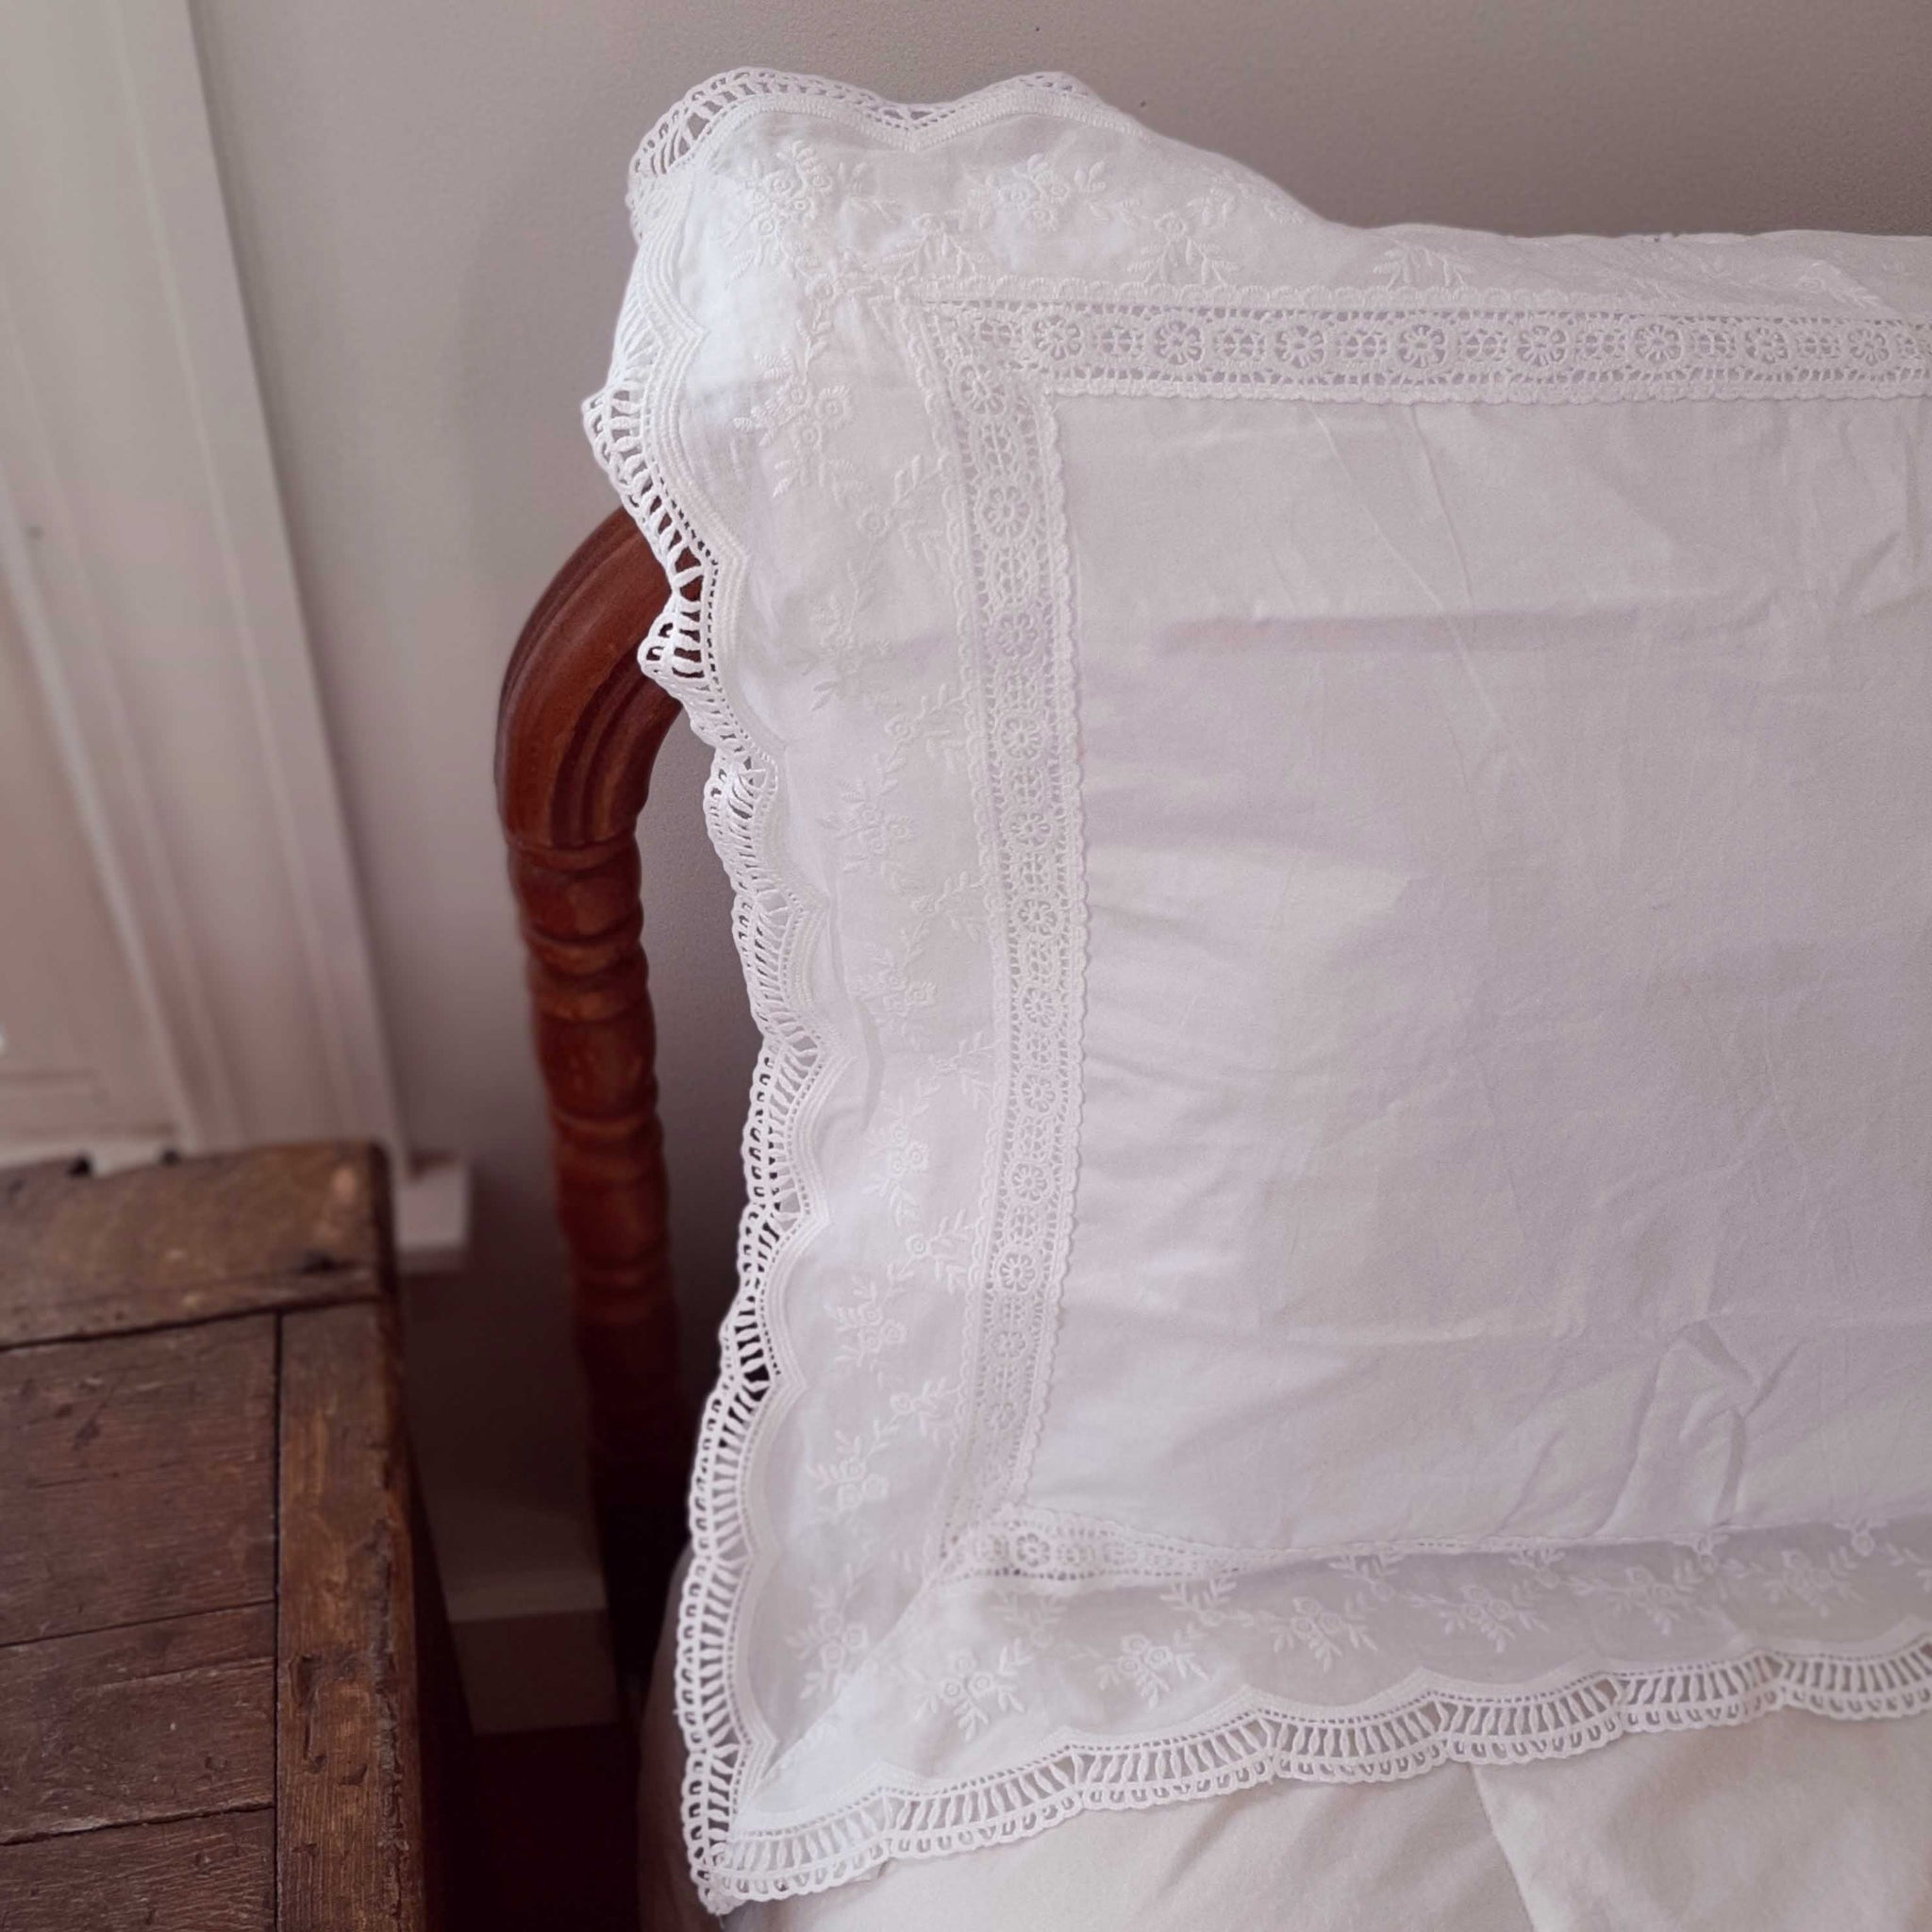 Antique Victorian White Woven Cotton Drawers with Eyelet Trim